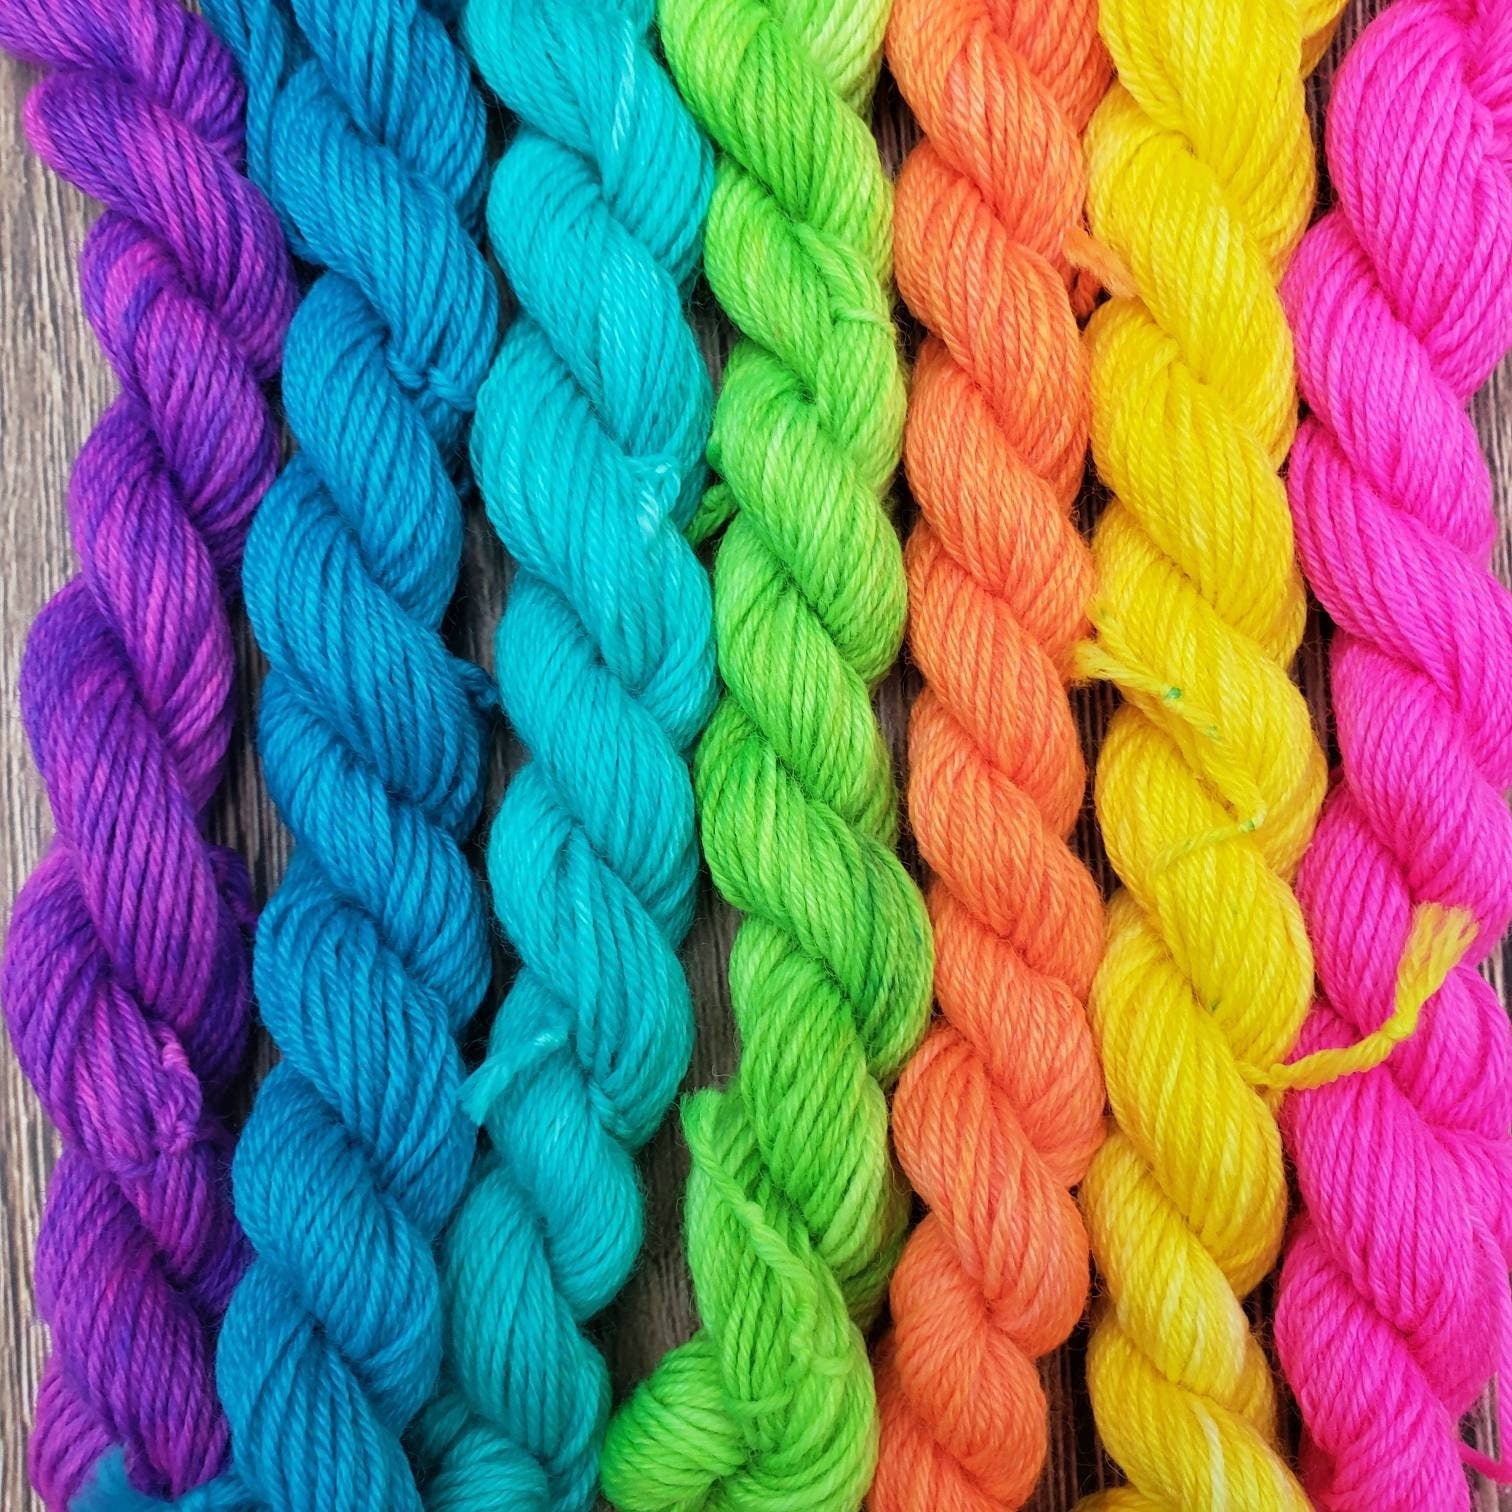 Rainbow Yarns and other colourful wools and yarns